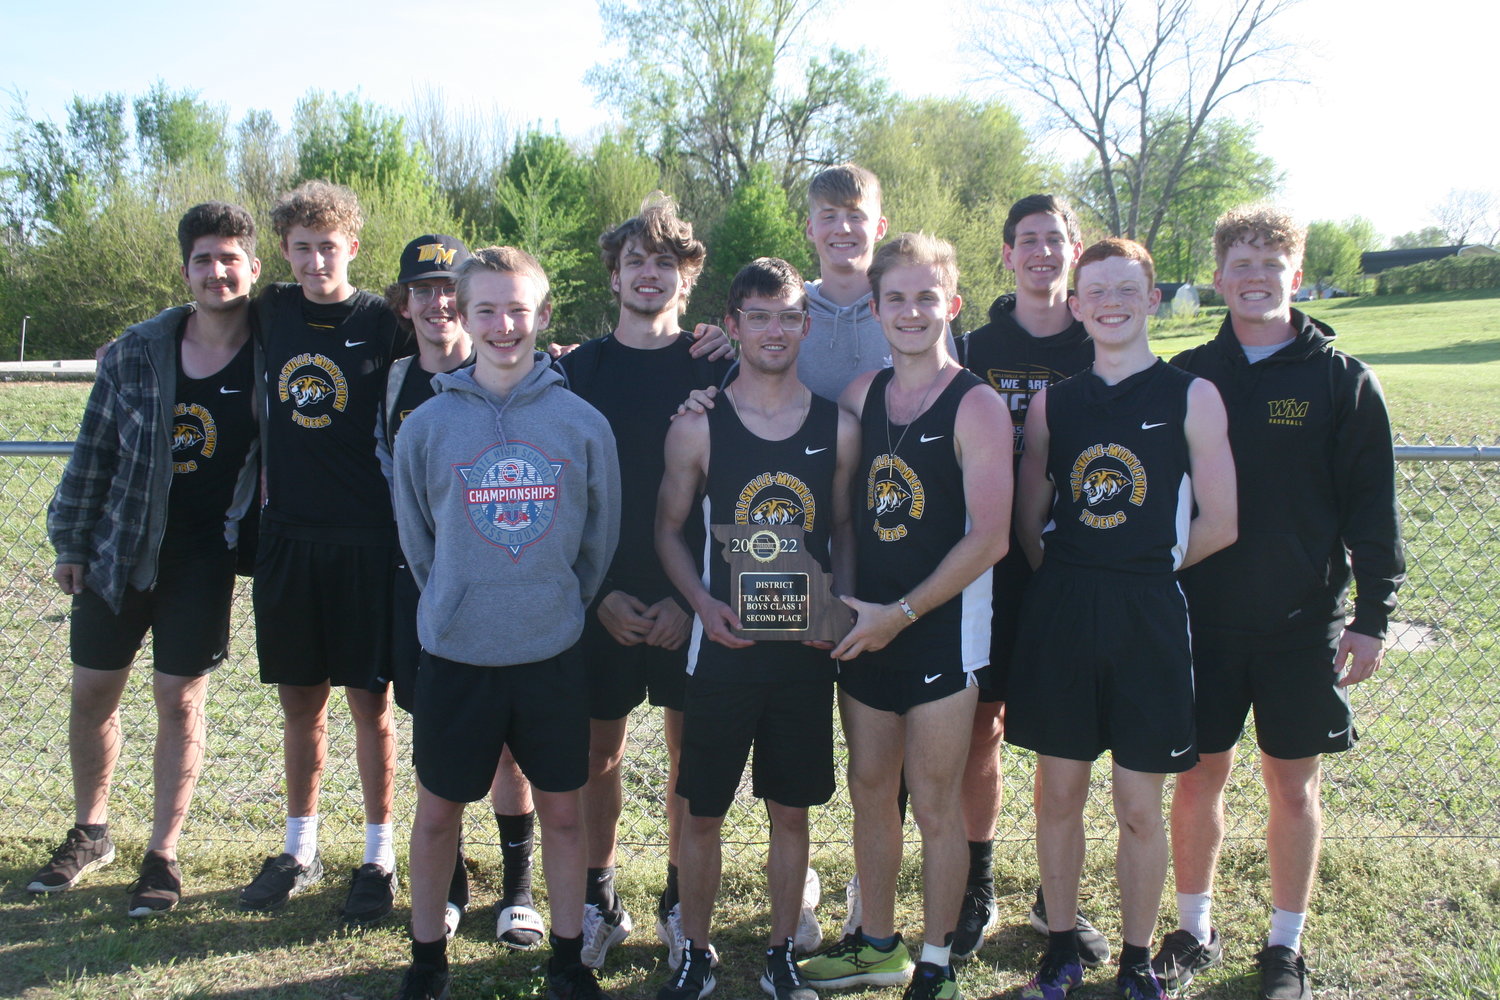 The Wellsville-Middletown boys track team poses with its second-place plaque from the Class 1, District 2 championship meet on May 7 at Glasgow High School. It’s the Tigers’ first district plaque in program history. Pictured are, front row from left, Jonah Slovensky, Jason Hollensteiner, Layne Norris and Hunter Bickell. Back row are Xavier Baig, Gage Marshall, Lucas Moore, Jacob Mandrell, Isaac Seabaugh, Cooper Henderson and Keaton Mayes.